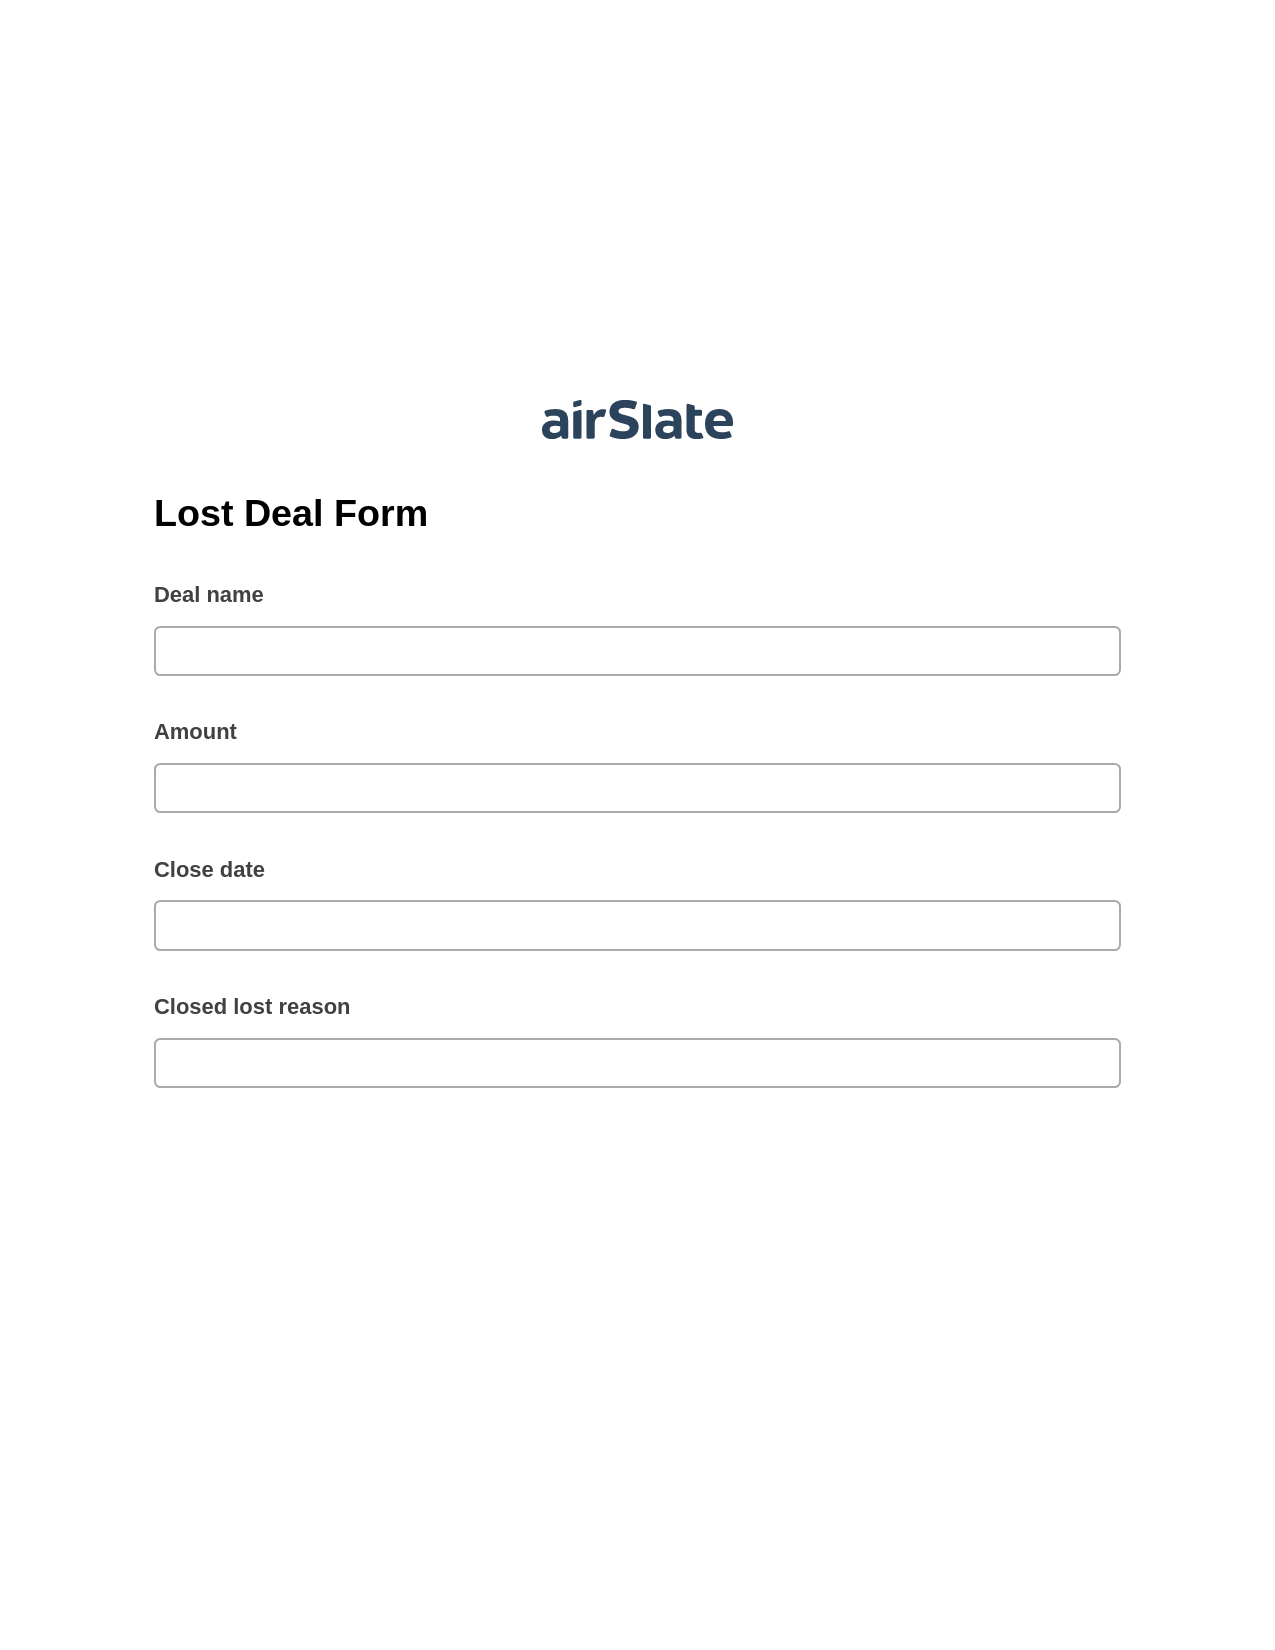 Lost Deal Form Pre-fill from CSV File Bot, Google Sheet Two-Way Binding Bot, Export to Excel 365 Bot